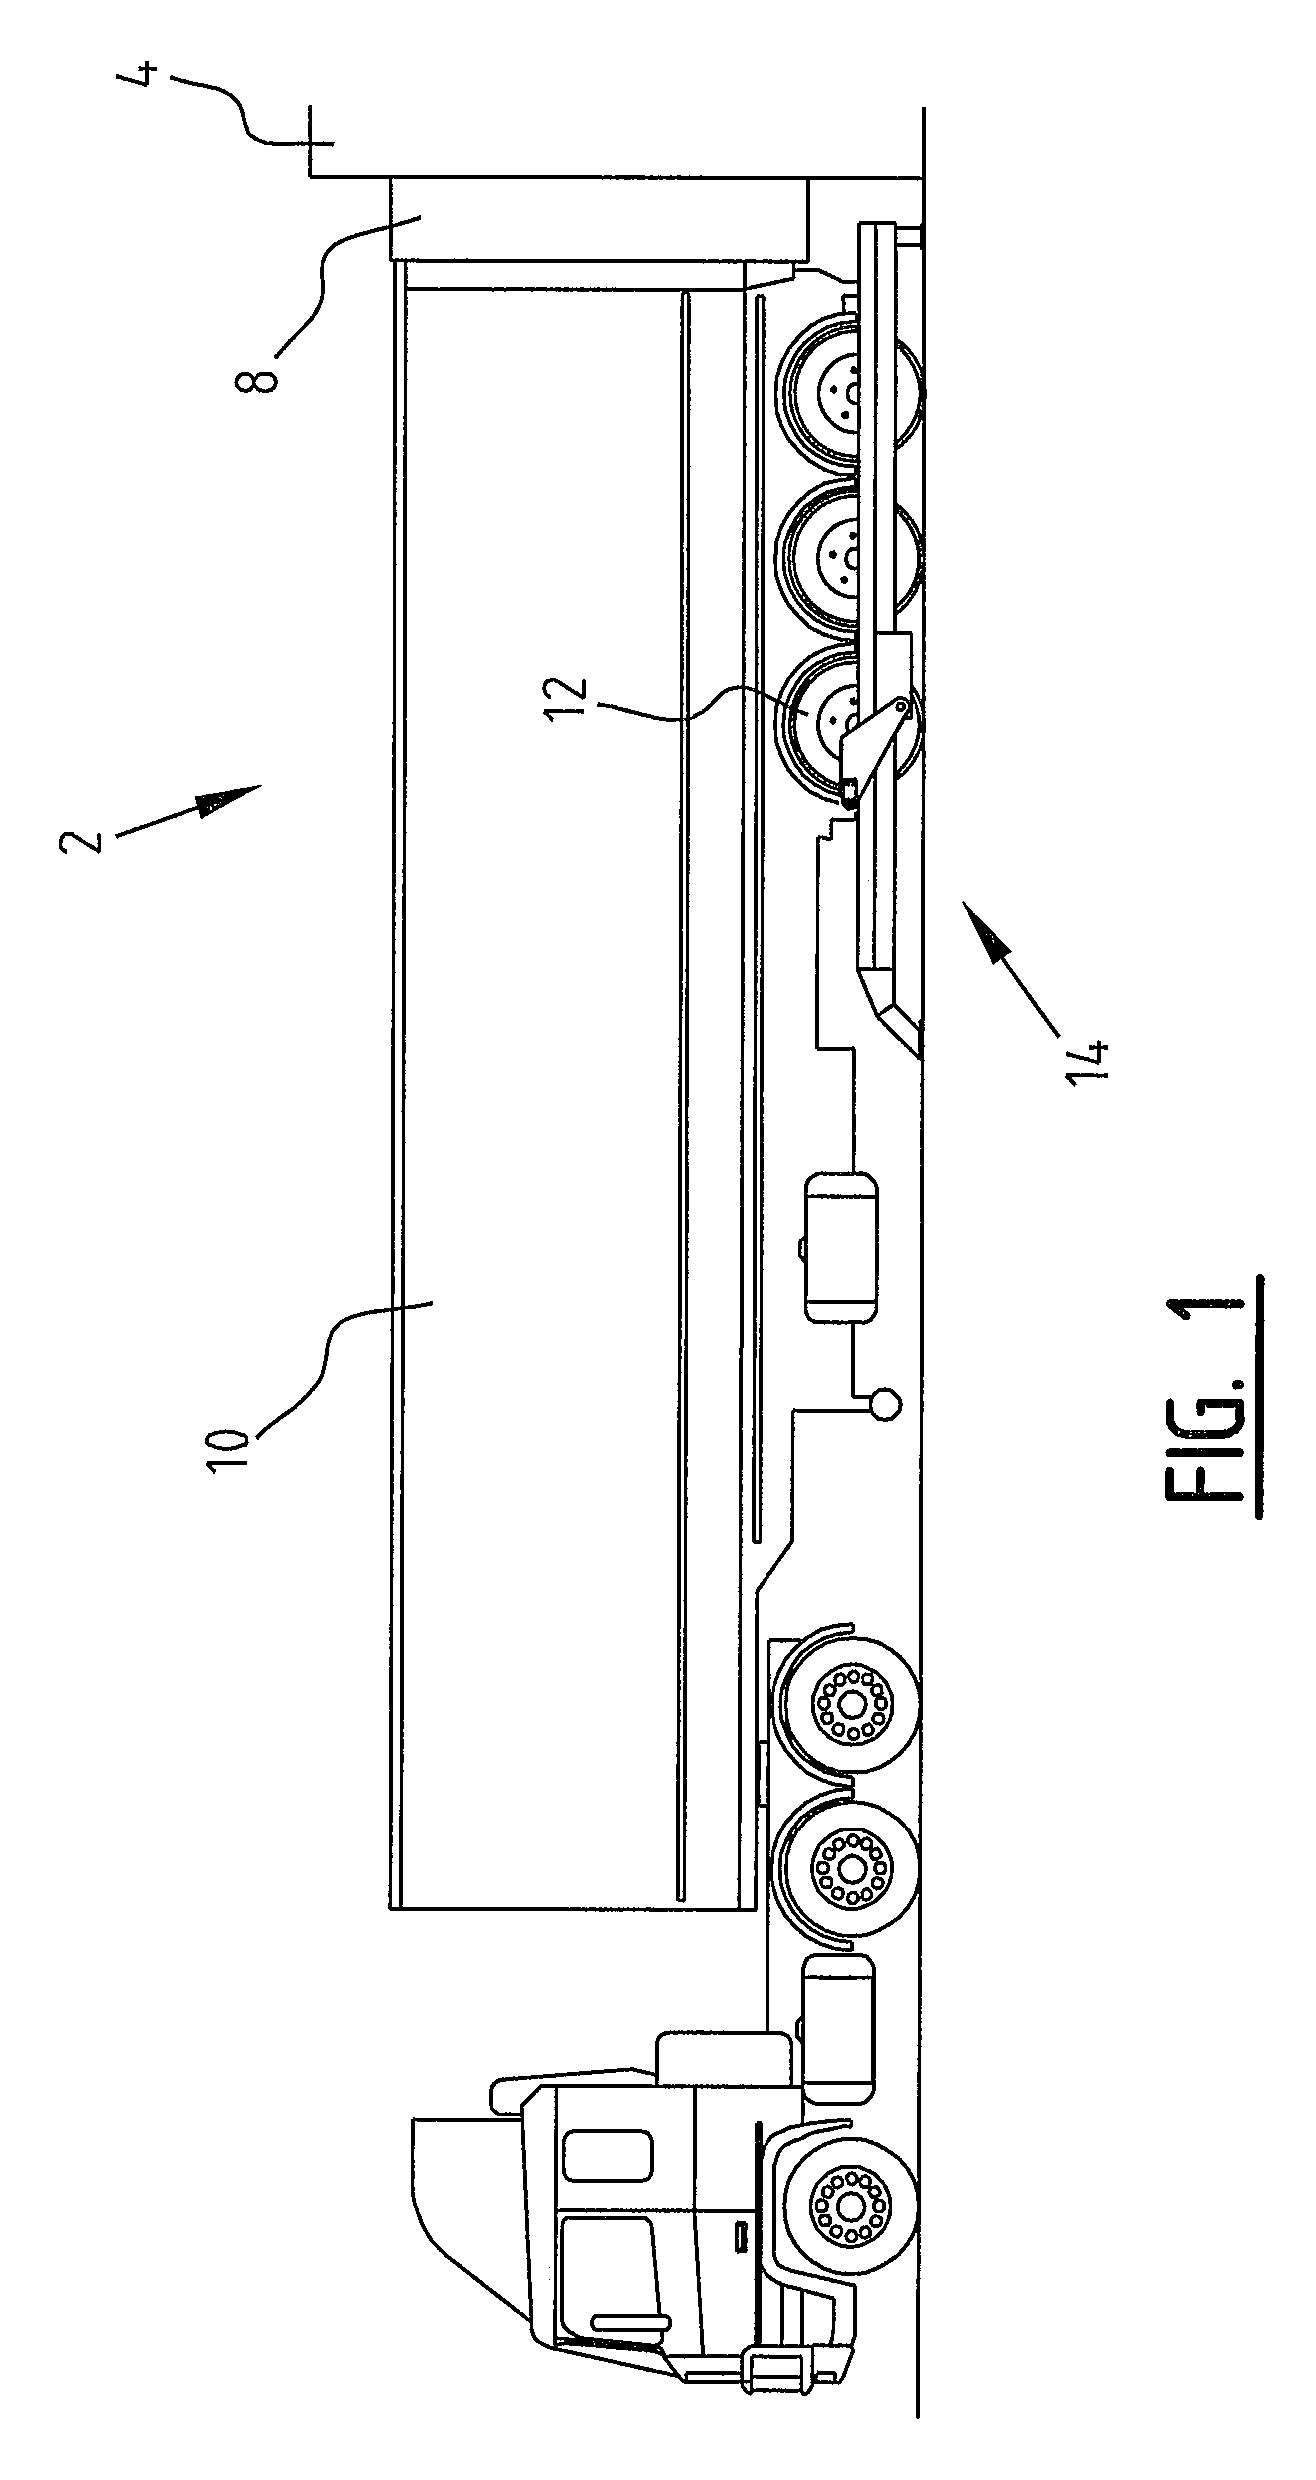 Device for blocking a vehicle, method therefor and loading-unloading station provided therewith